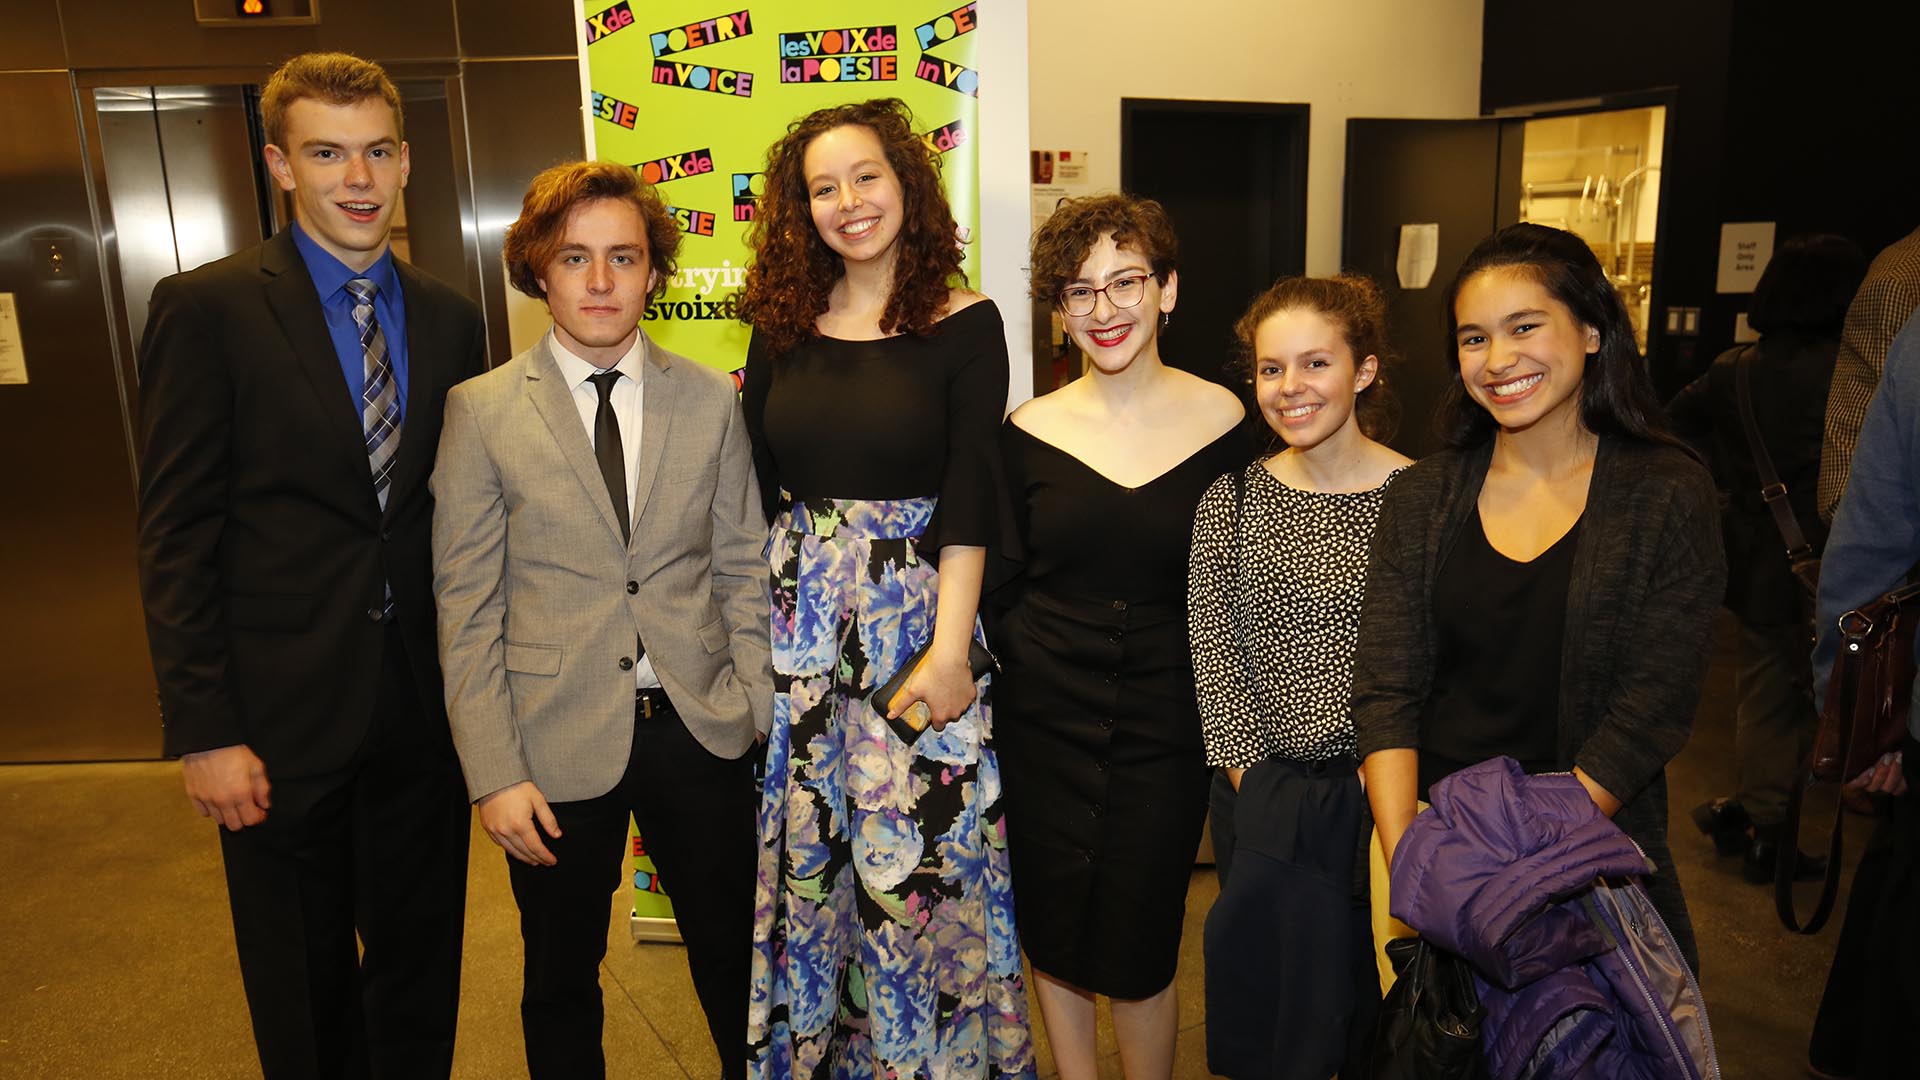 In the evening our students arrive to attend the English Finals & Showcase (l to r): Daniel Gallagher, David White, Katie Beale, Hannah Halpern, Lorraine Fabre, and Elizabeth Wong.